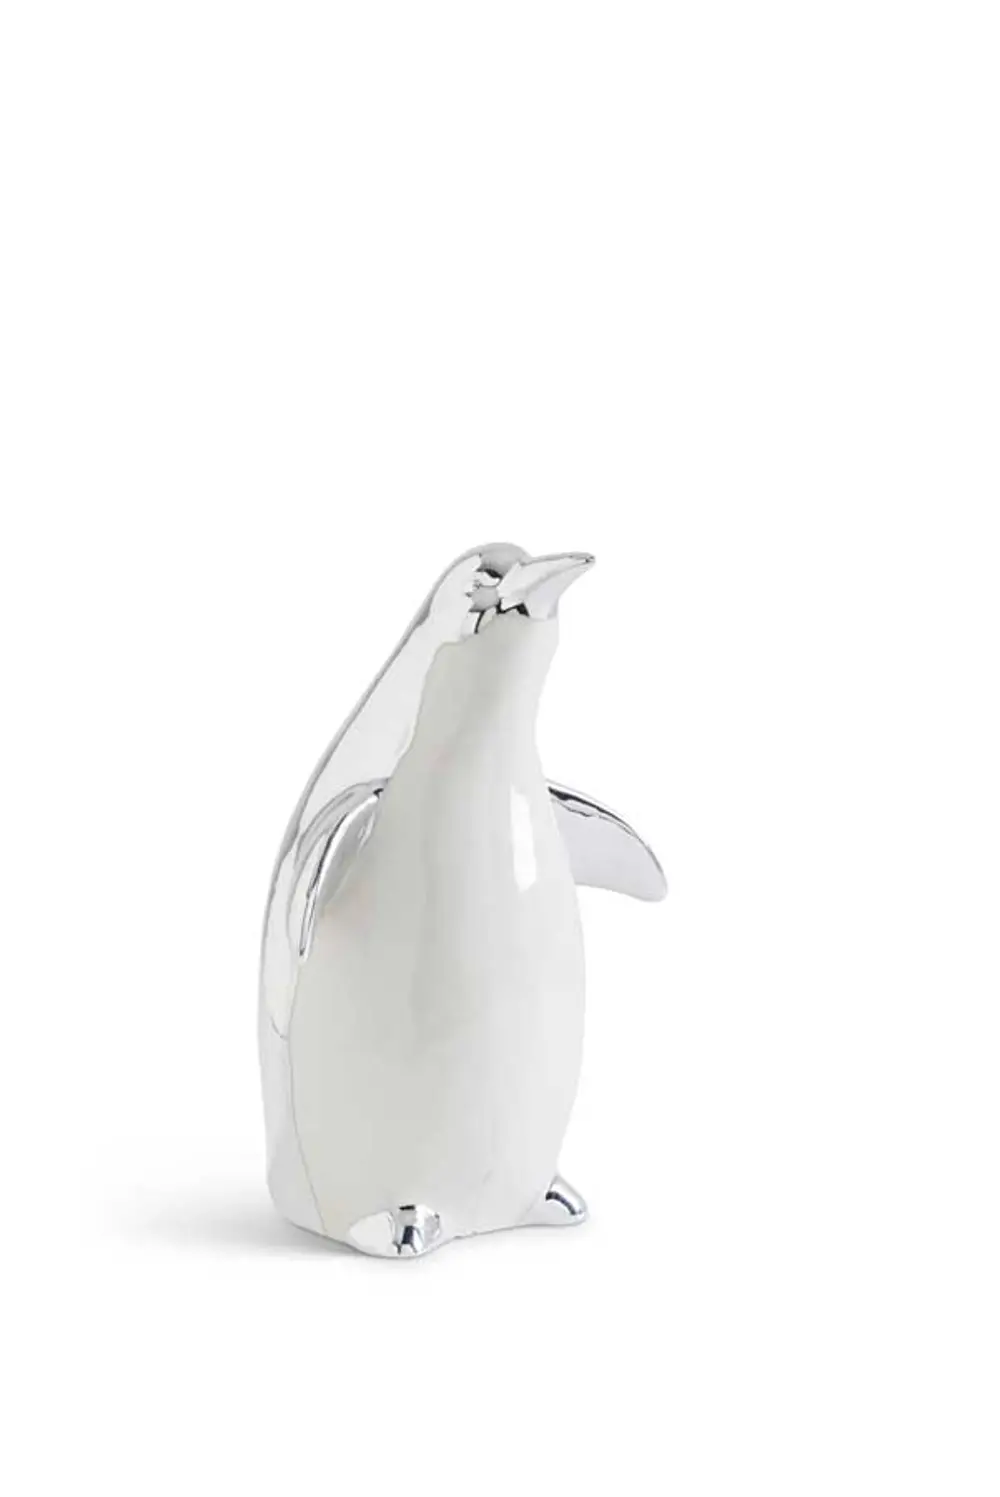 8 Inch White and Silver Penguin-1